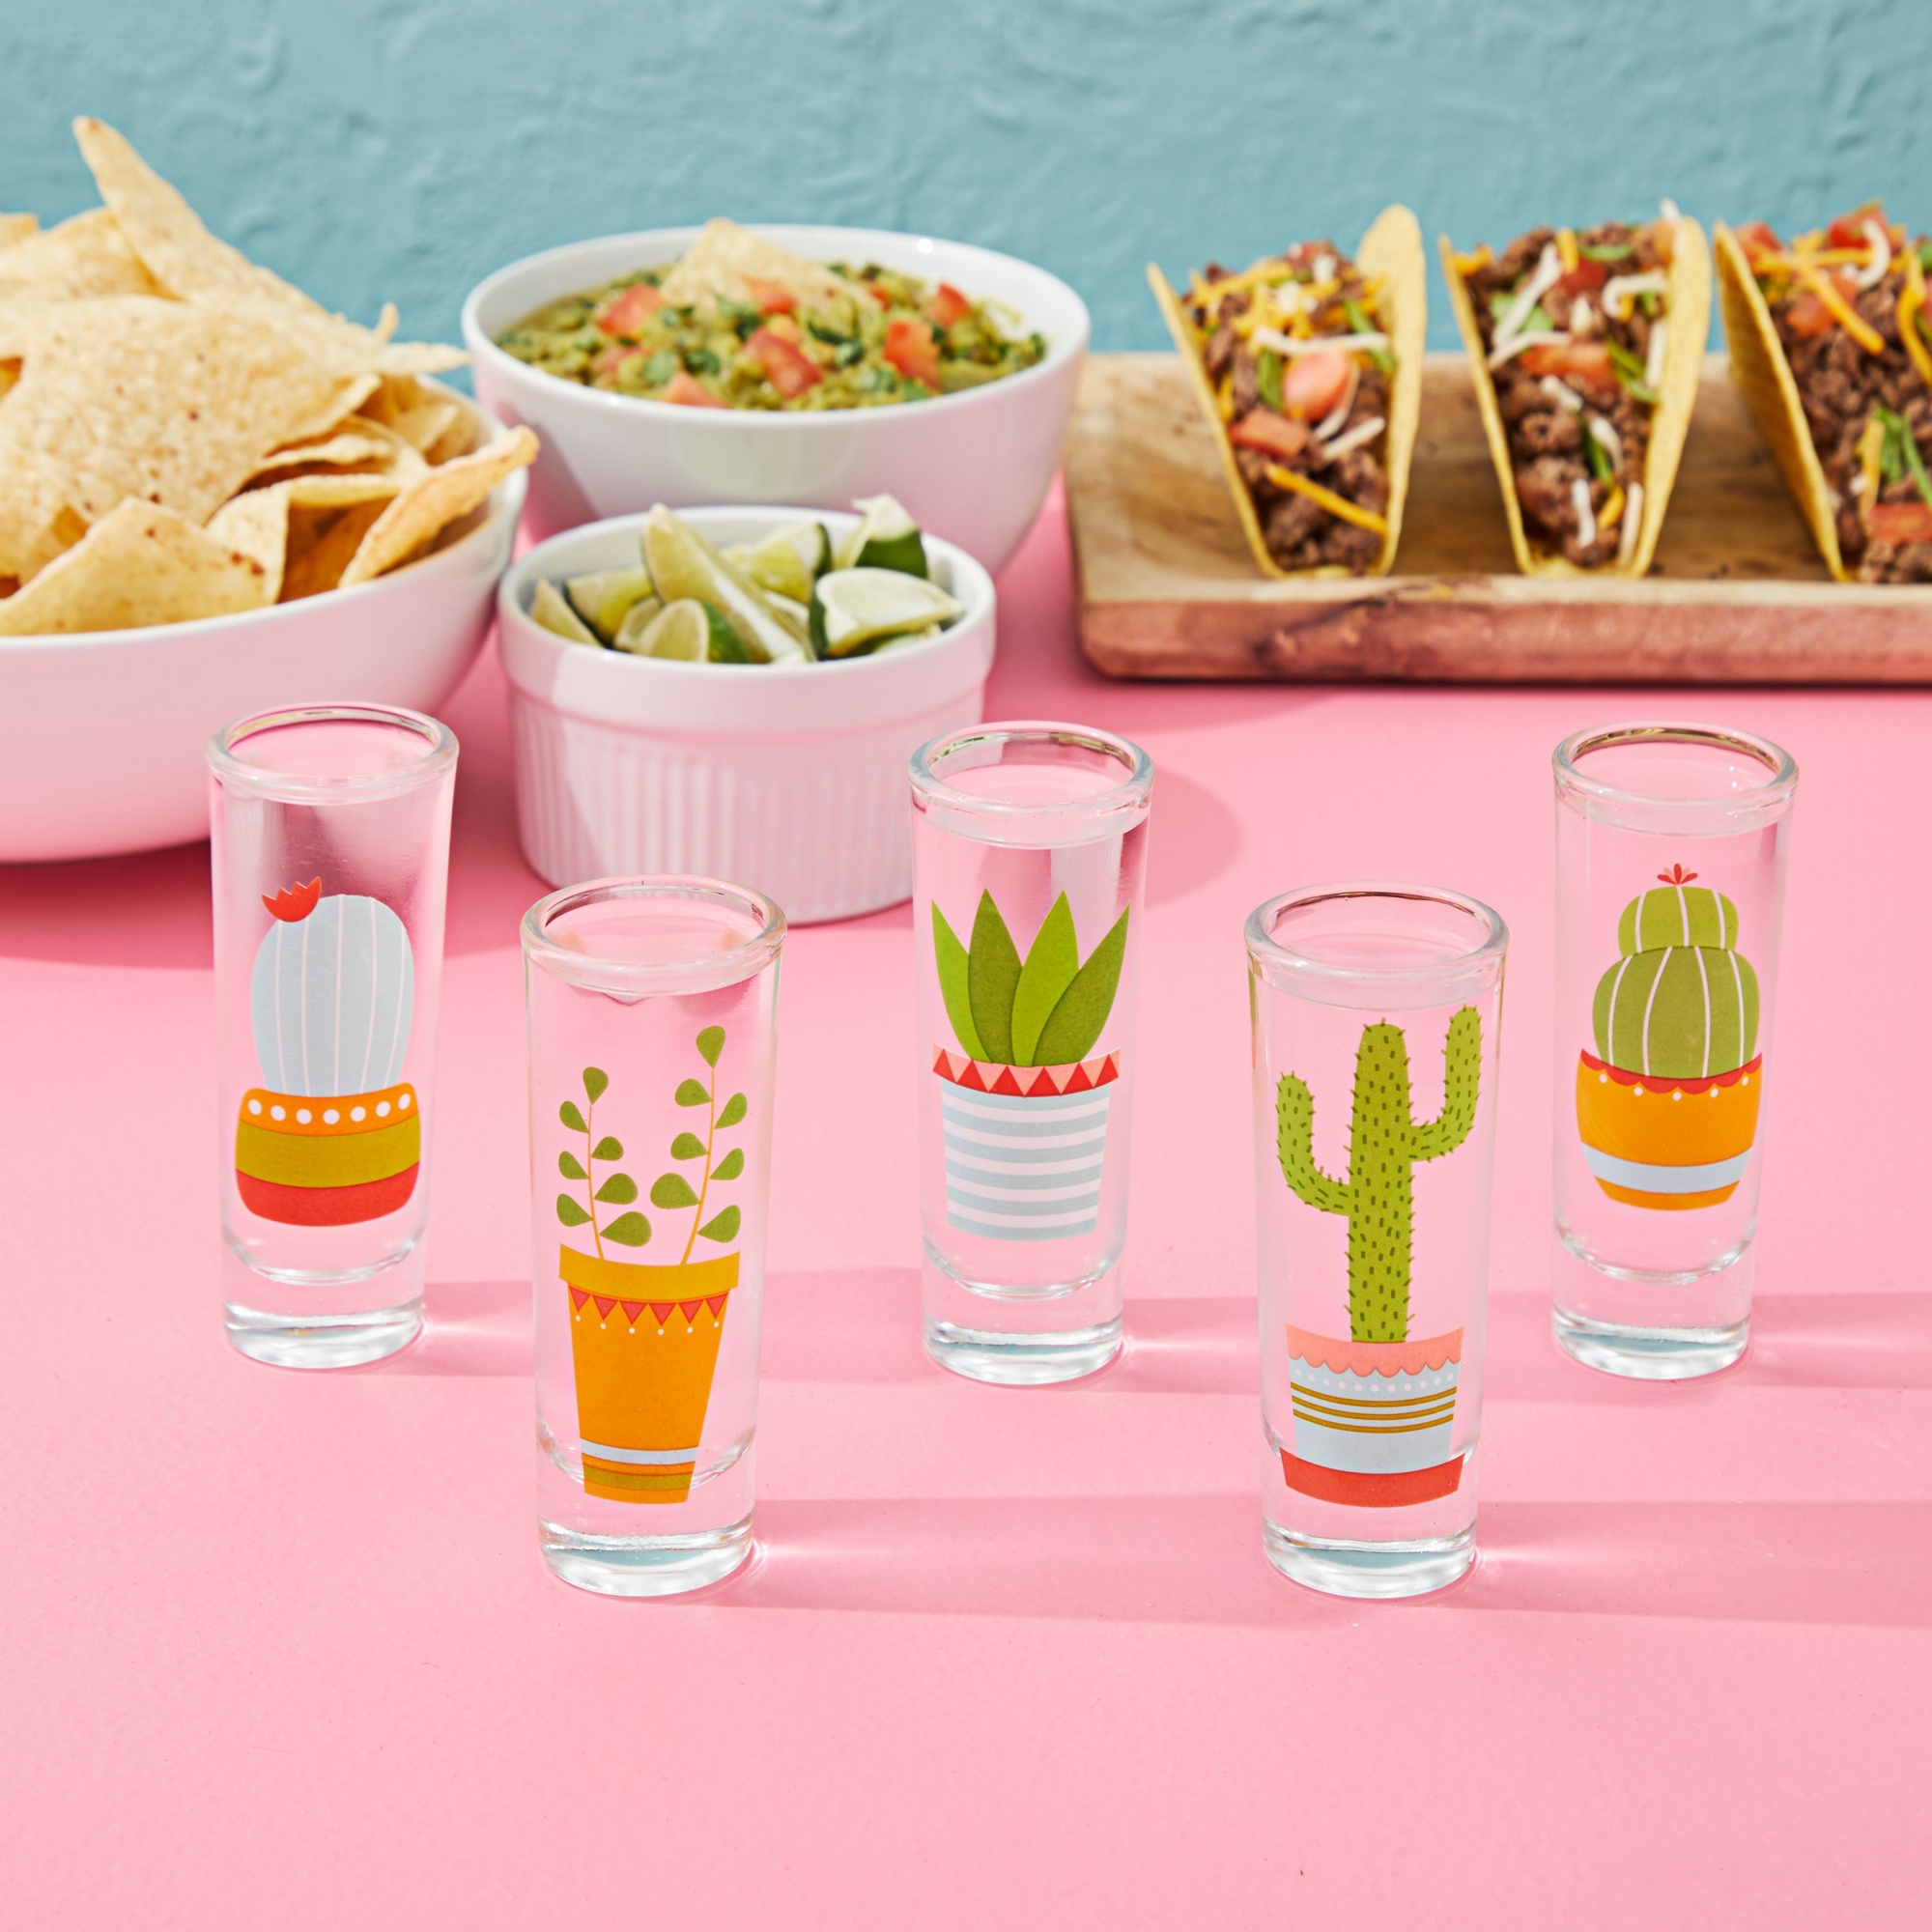 5 Pack Shot Glasses Set with Cactus Designs for Bachelorette, Fiesta Supplies, Western-Themed Party, Round, Decorative Shot Glasses with Heavy Base for Tequila, Whiskey, Vodka (2 oz) - image 4 of 10